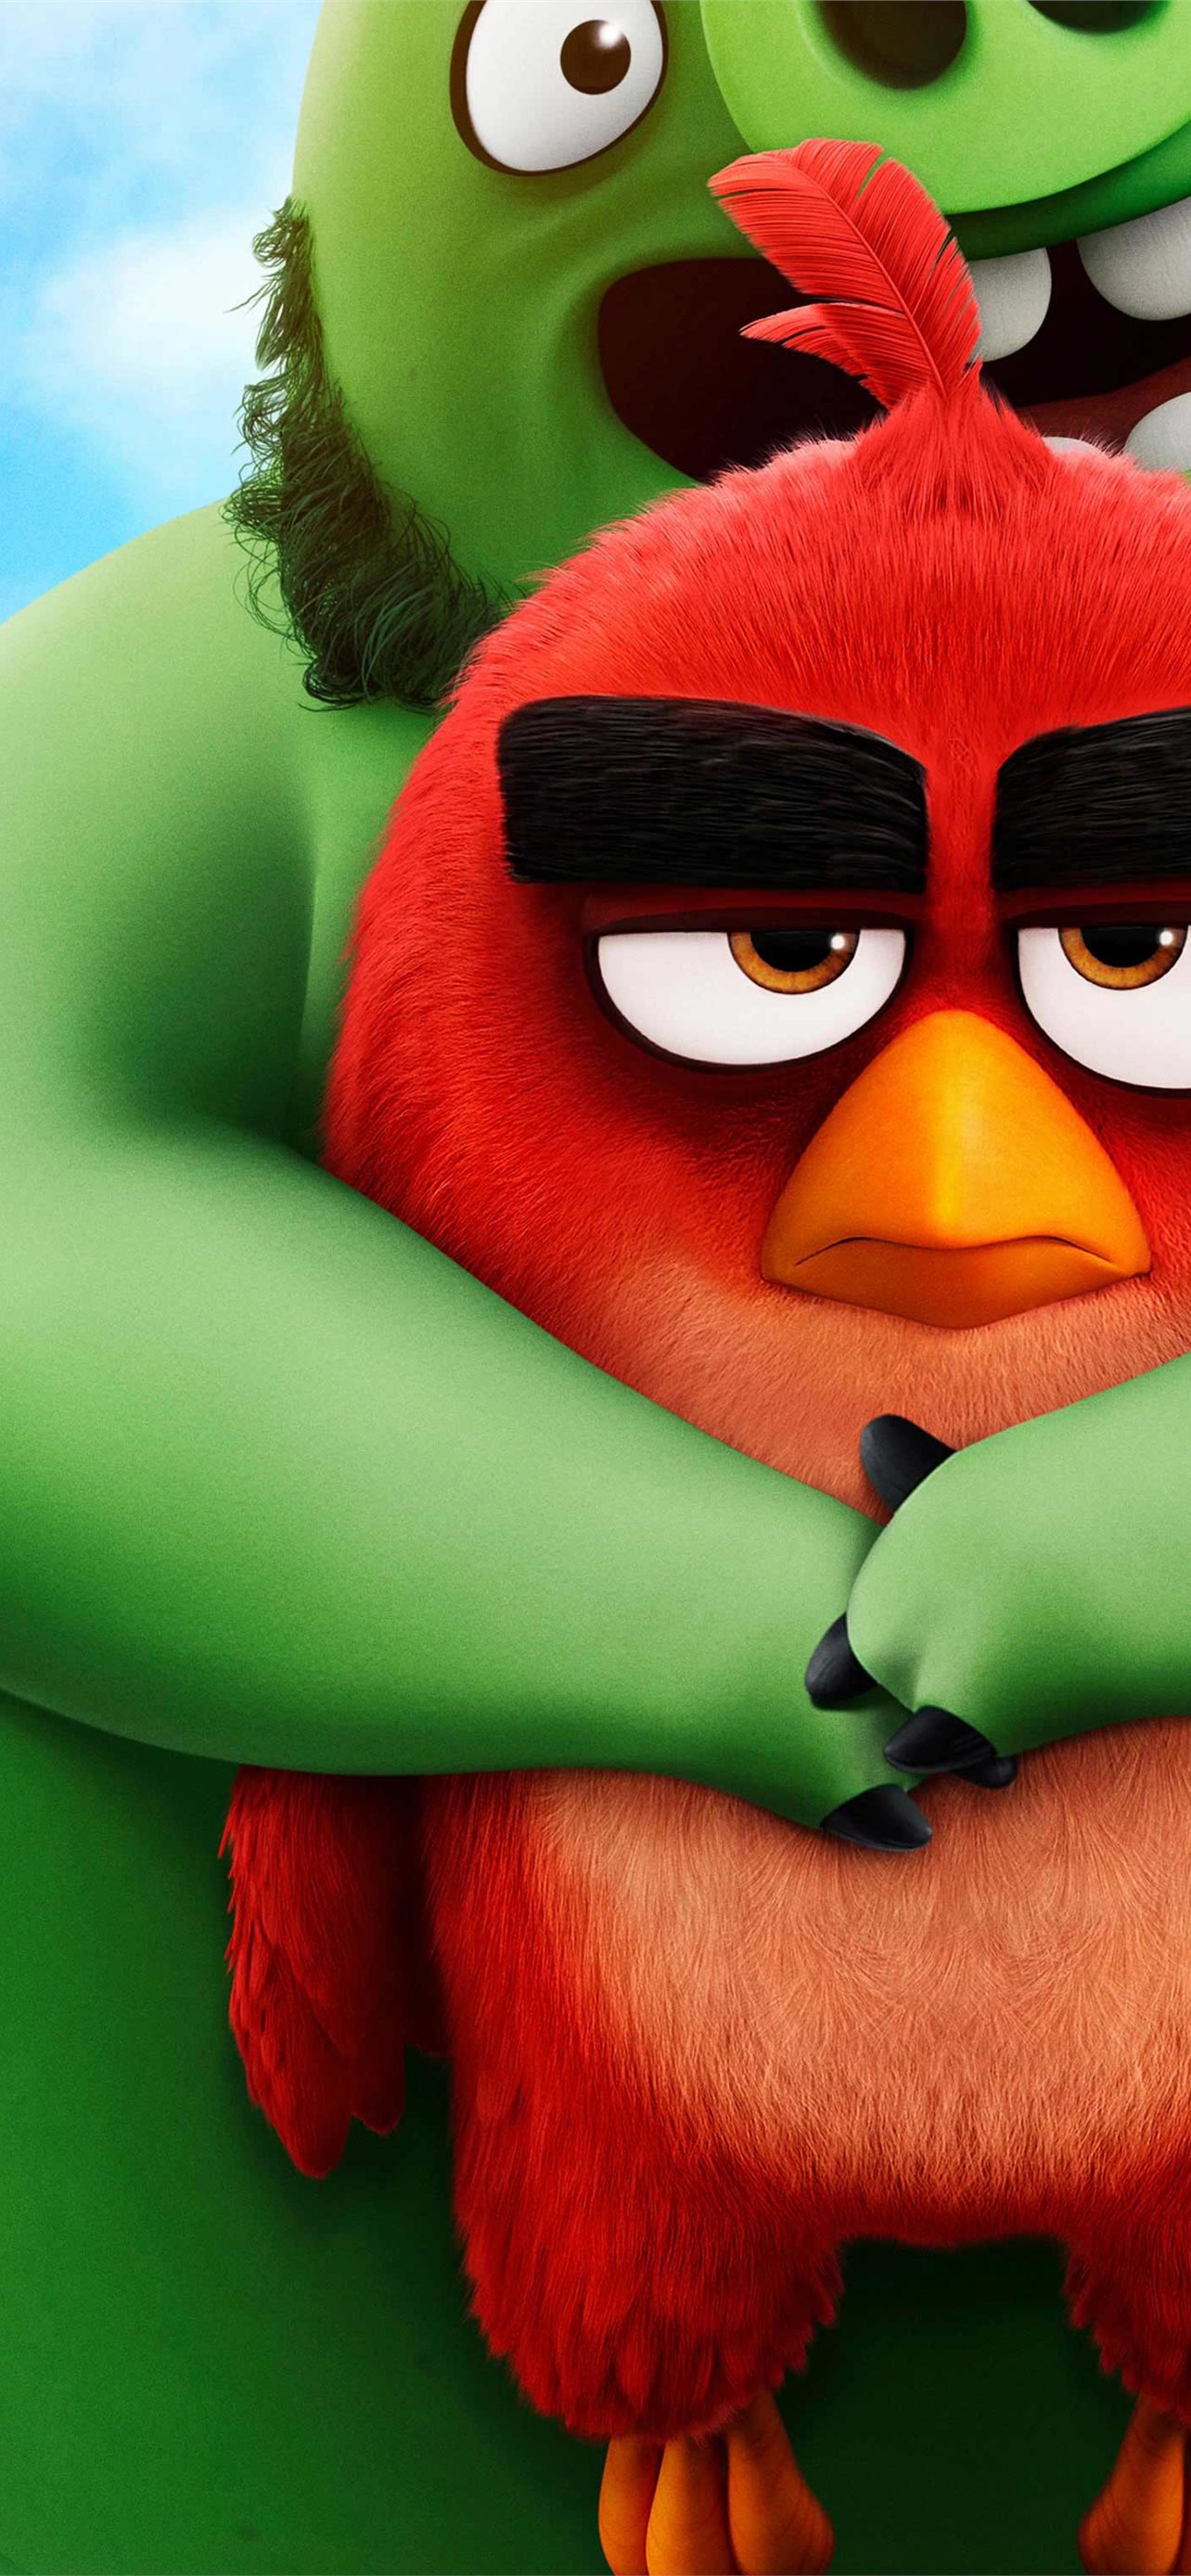 Angry Birds 2 Note10 iPhone wallpaper 